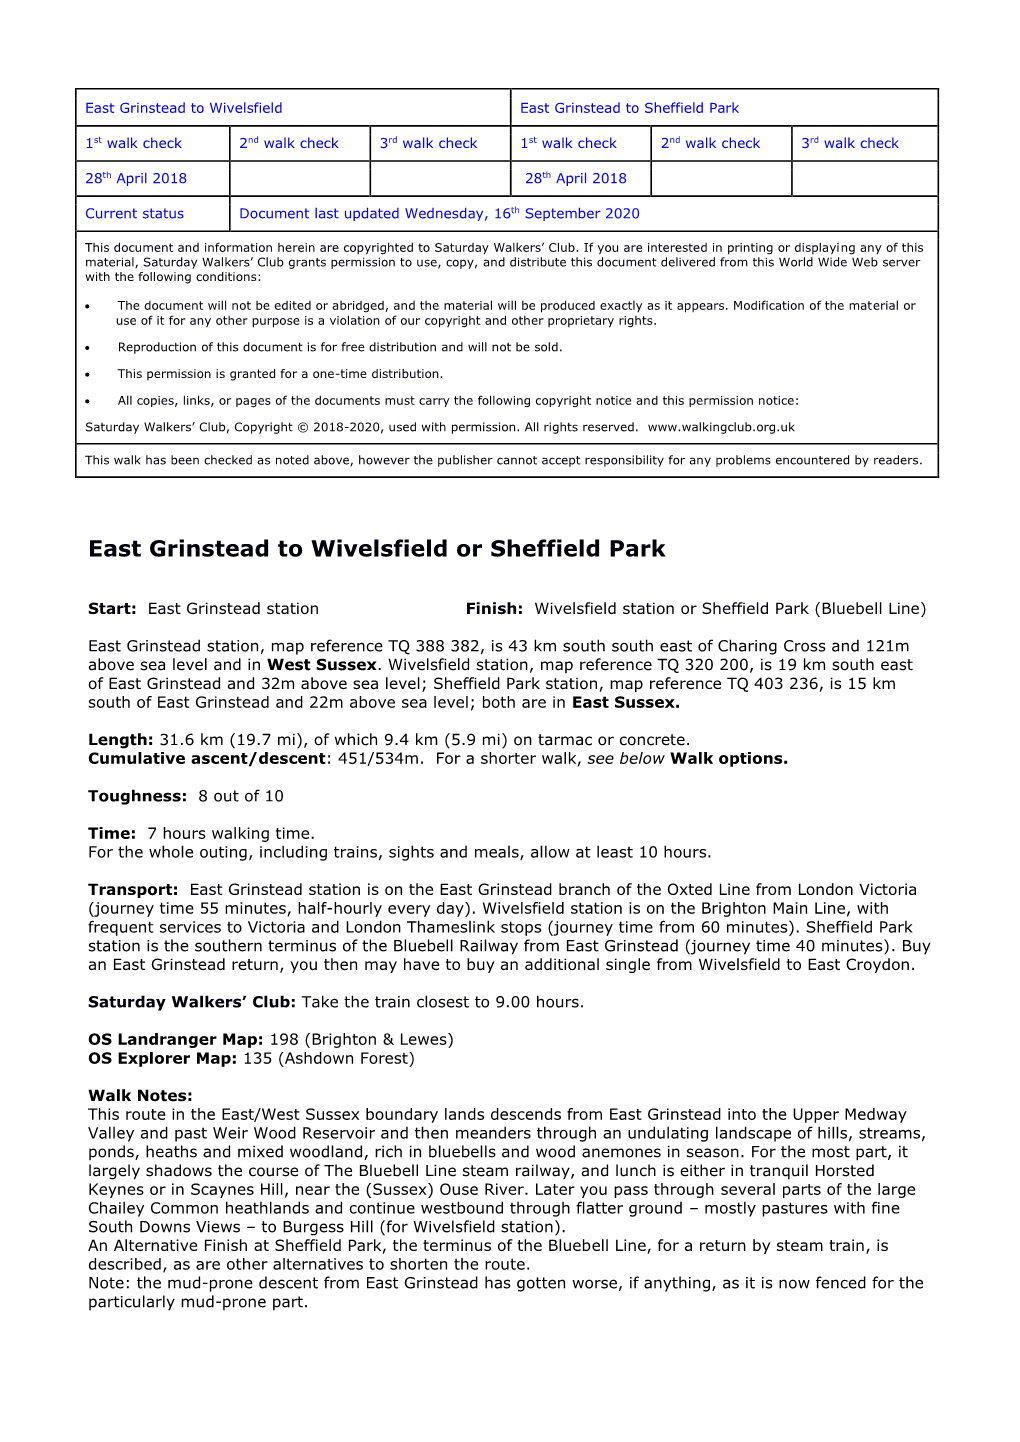 East Grinstead to Wivelsfield Or Sheffield Park